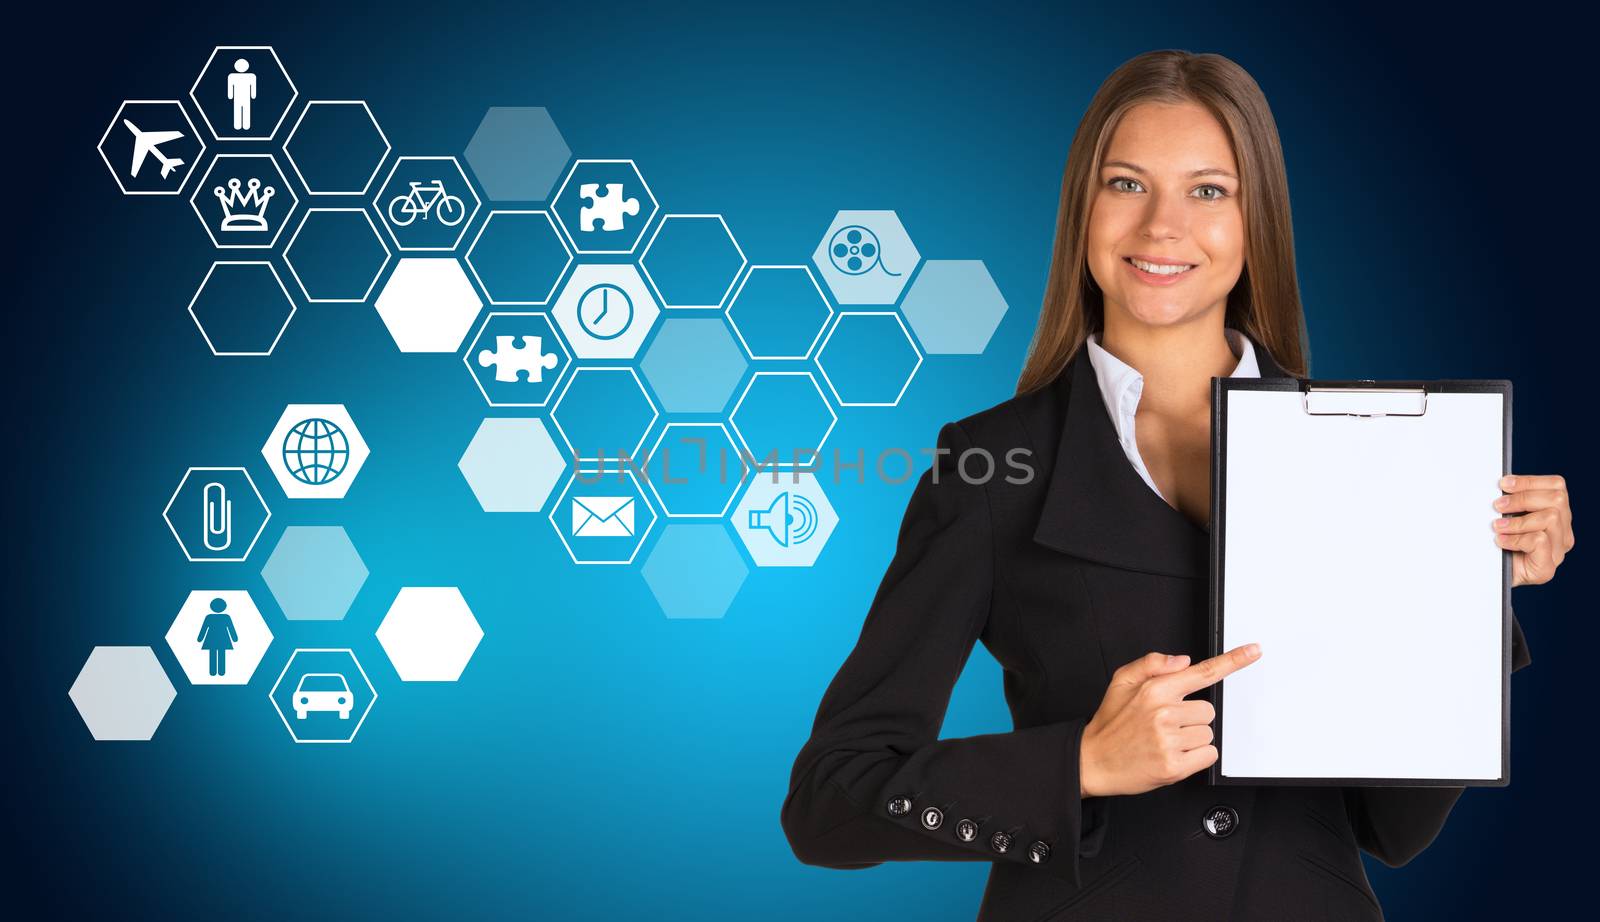 Beautiful businesswoman in suit holding paper holder. Hexagons with icons in background